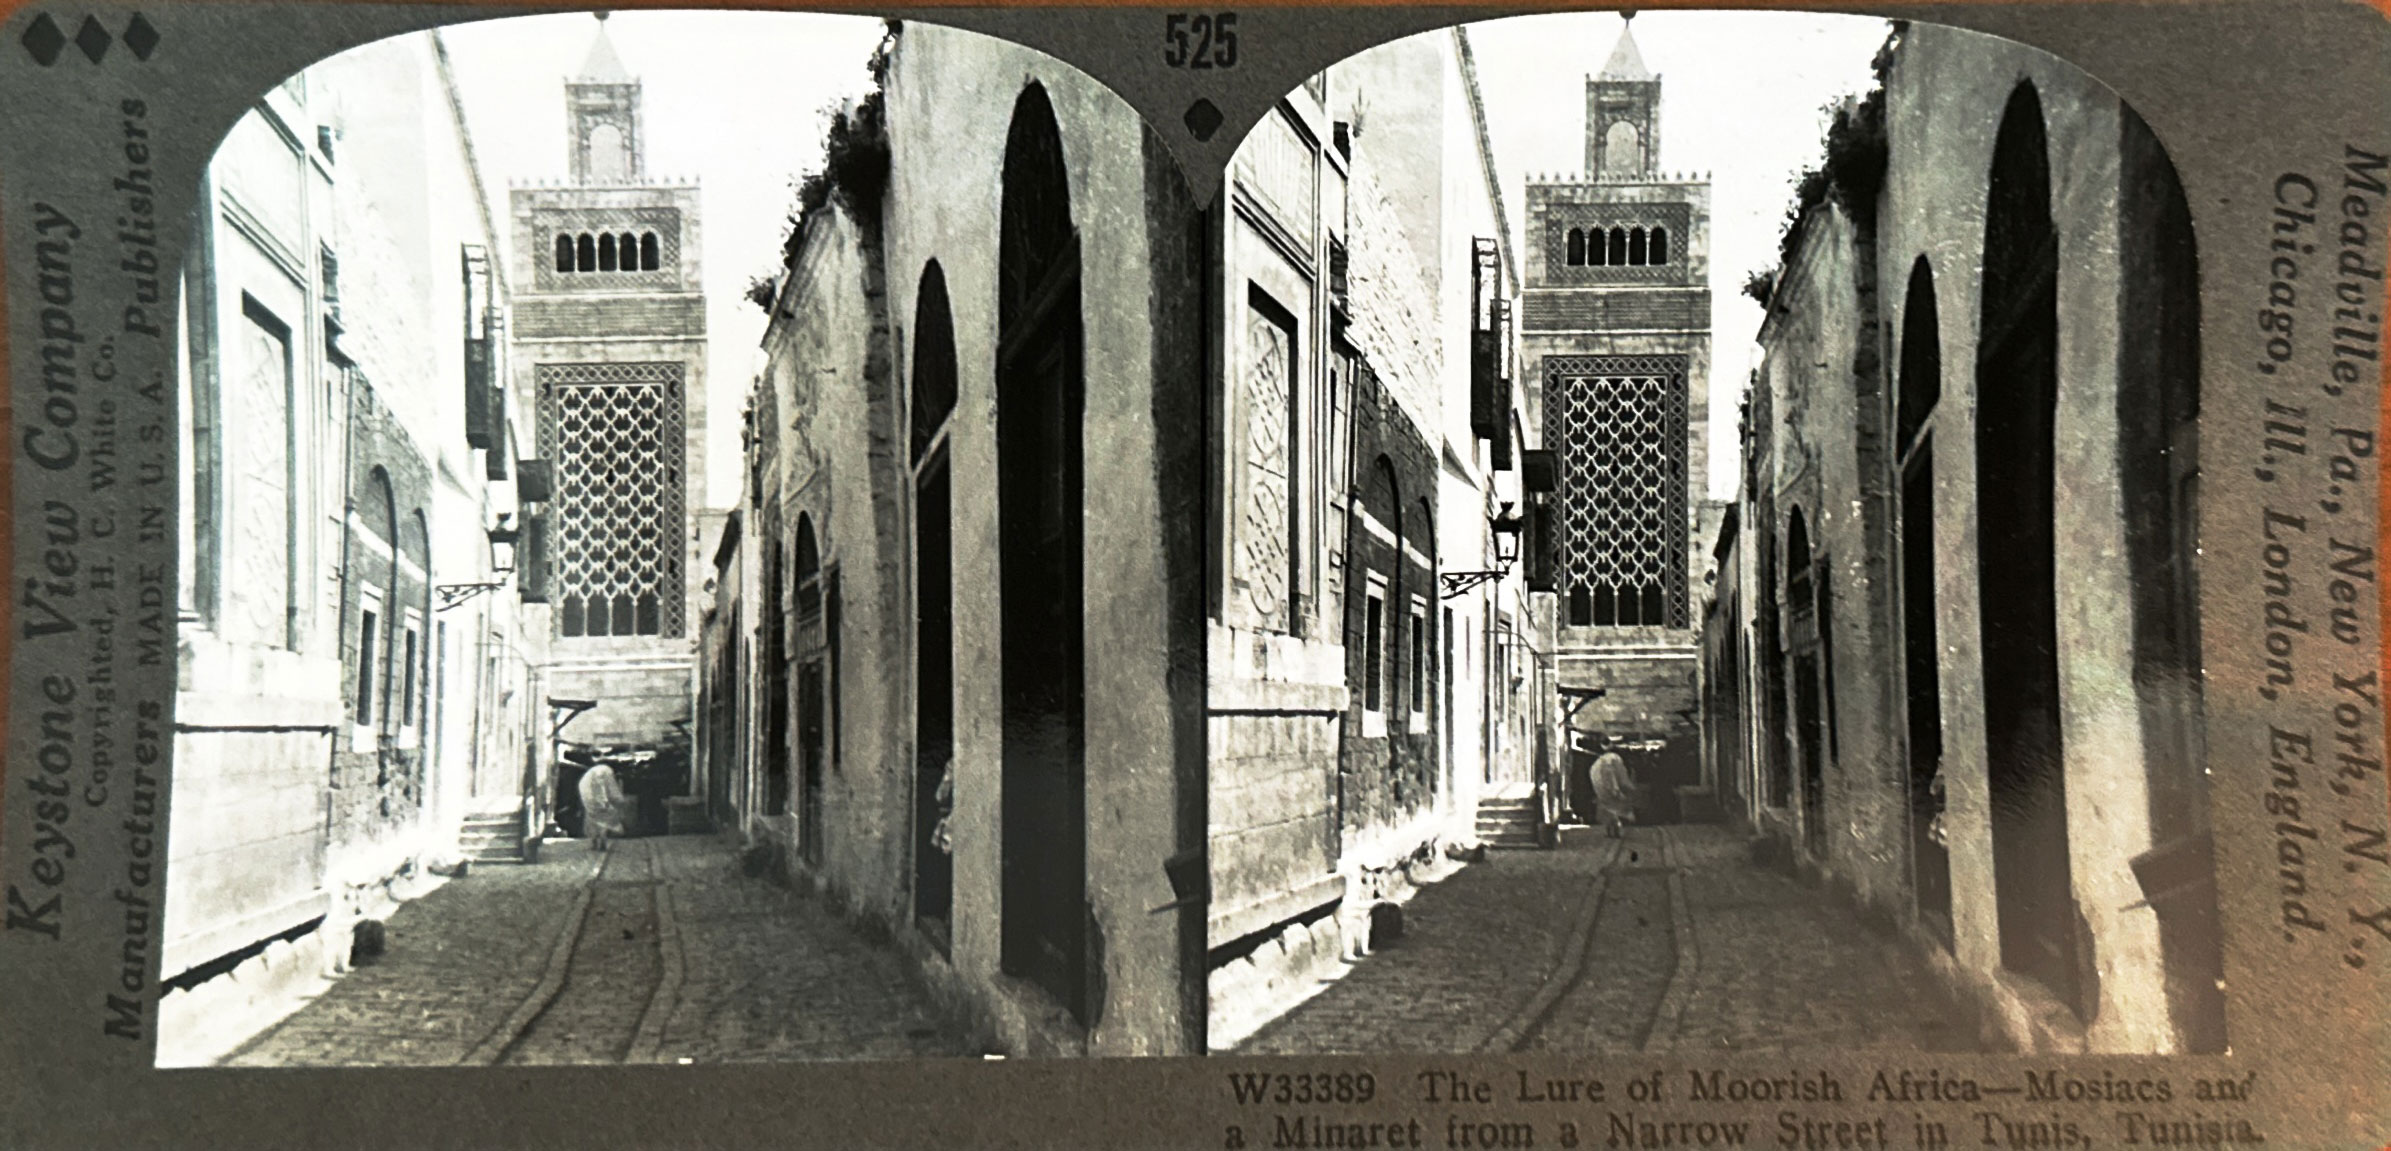 <p>"The Lure of Moorish Africa. Mosaics and a minaret from a narrow street in Tunis, Tunisia" (sic)</p>